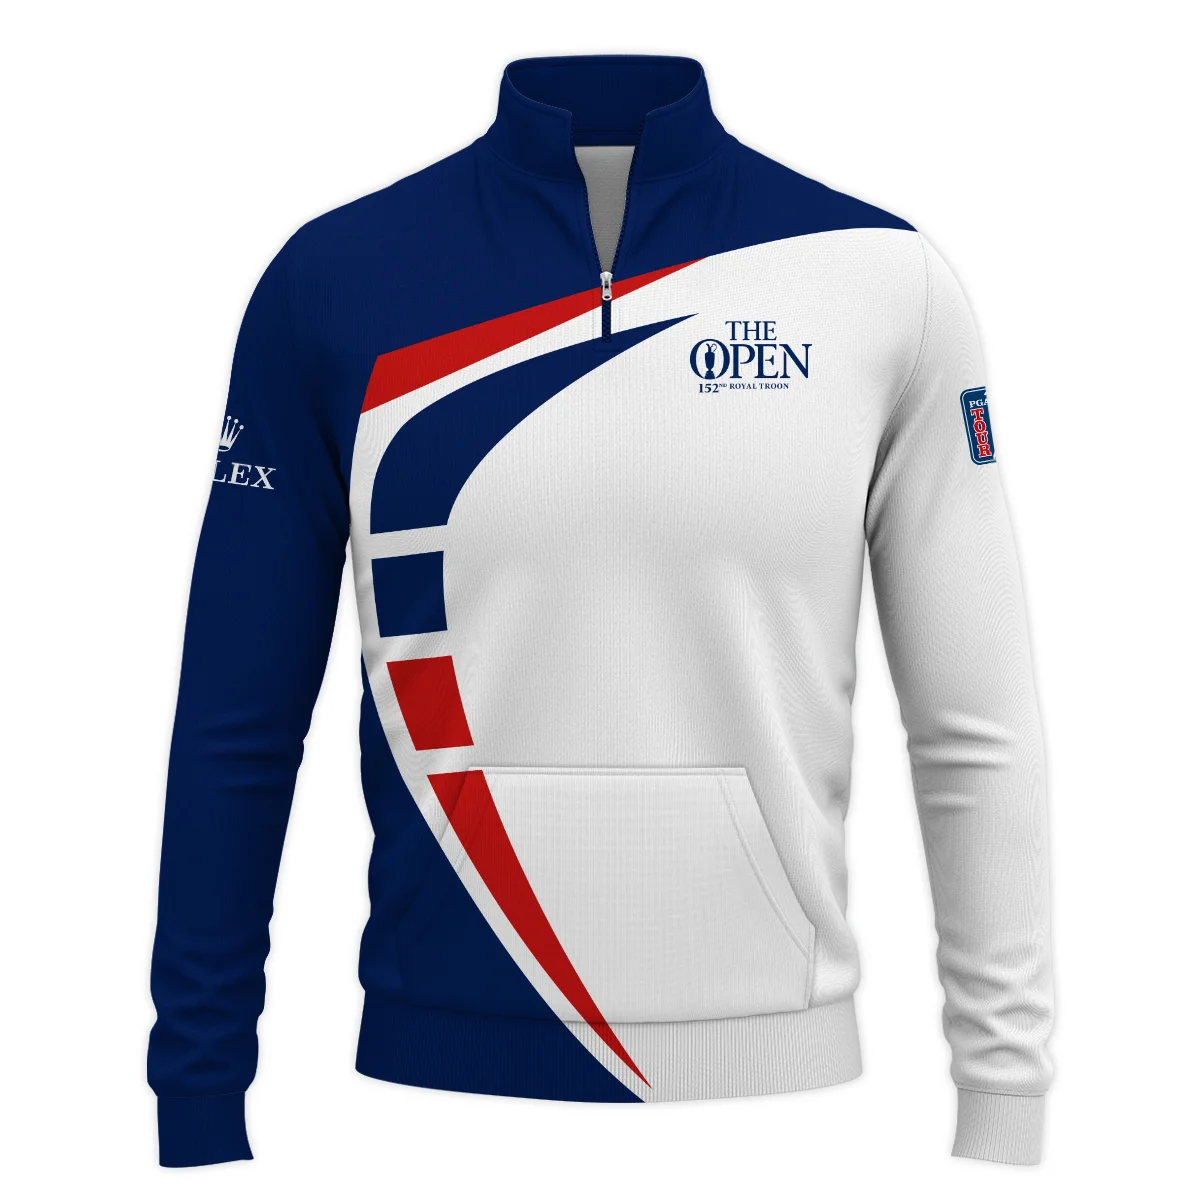 152nd Open Championship Rolex White Blue Red Pattern Background Zipper Hoodie Shirt All Over Prints HOTOP270624A03ROXZHD